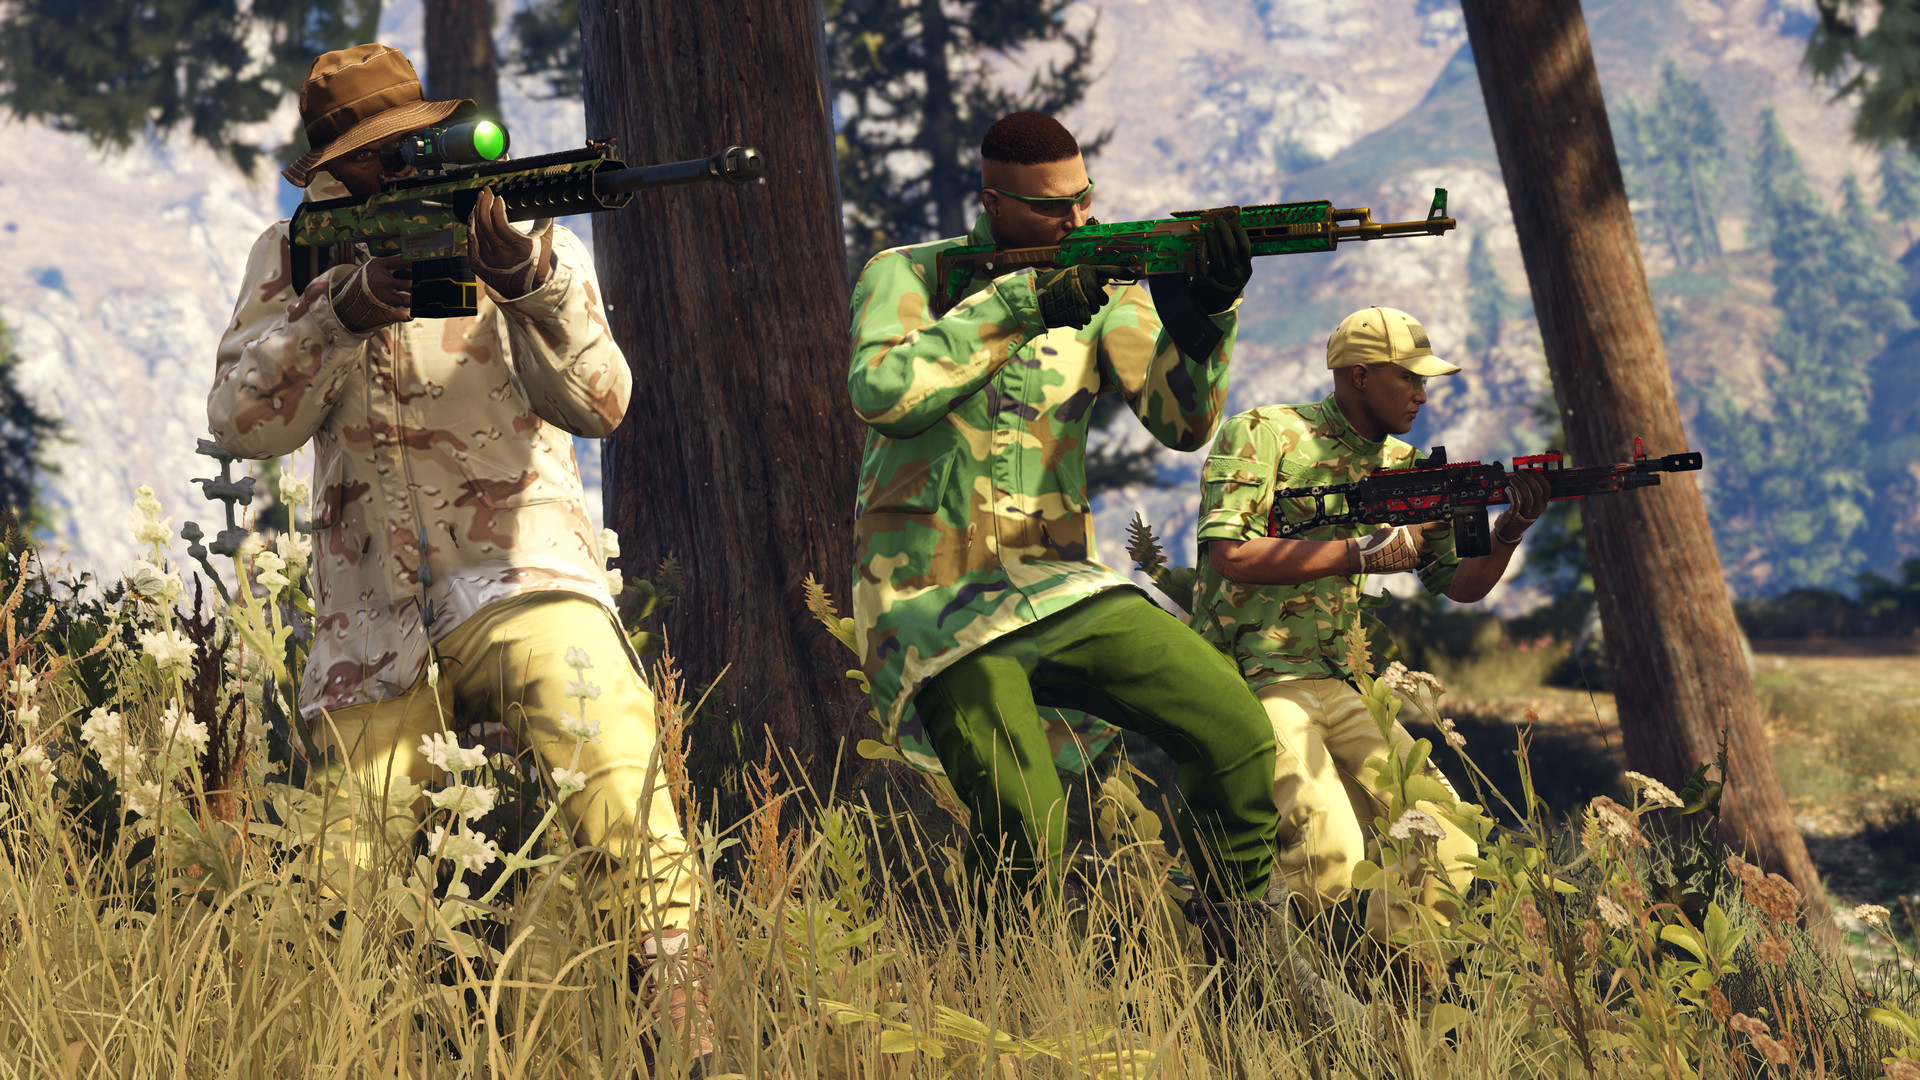 Gta Online Players Avoid Playing Extreme Exploits